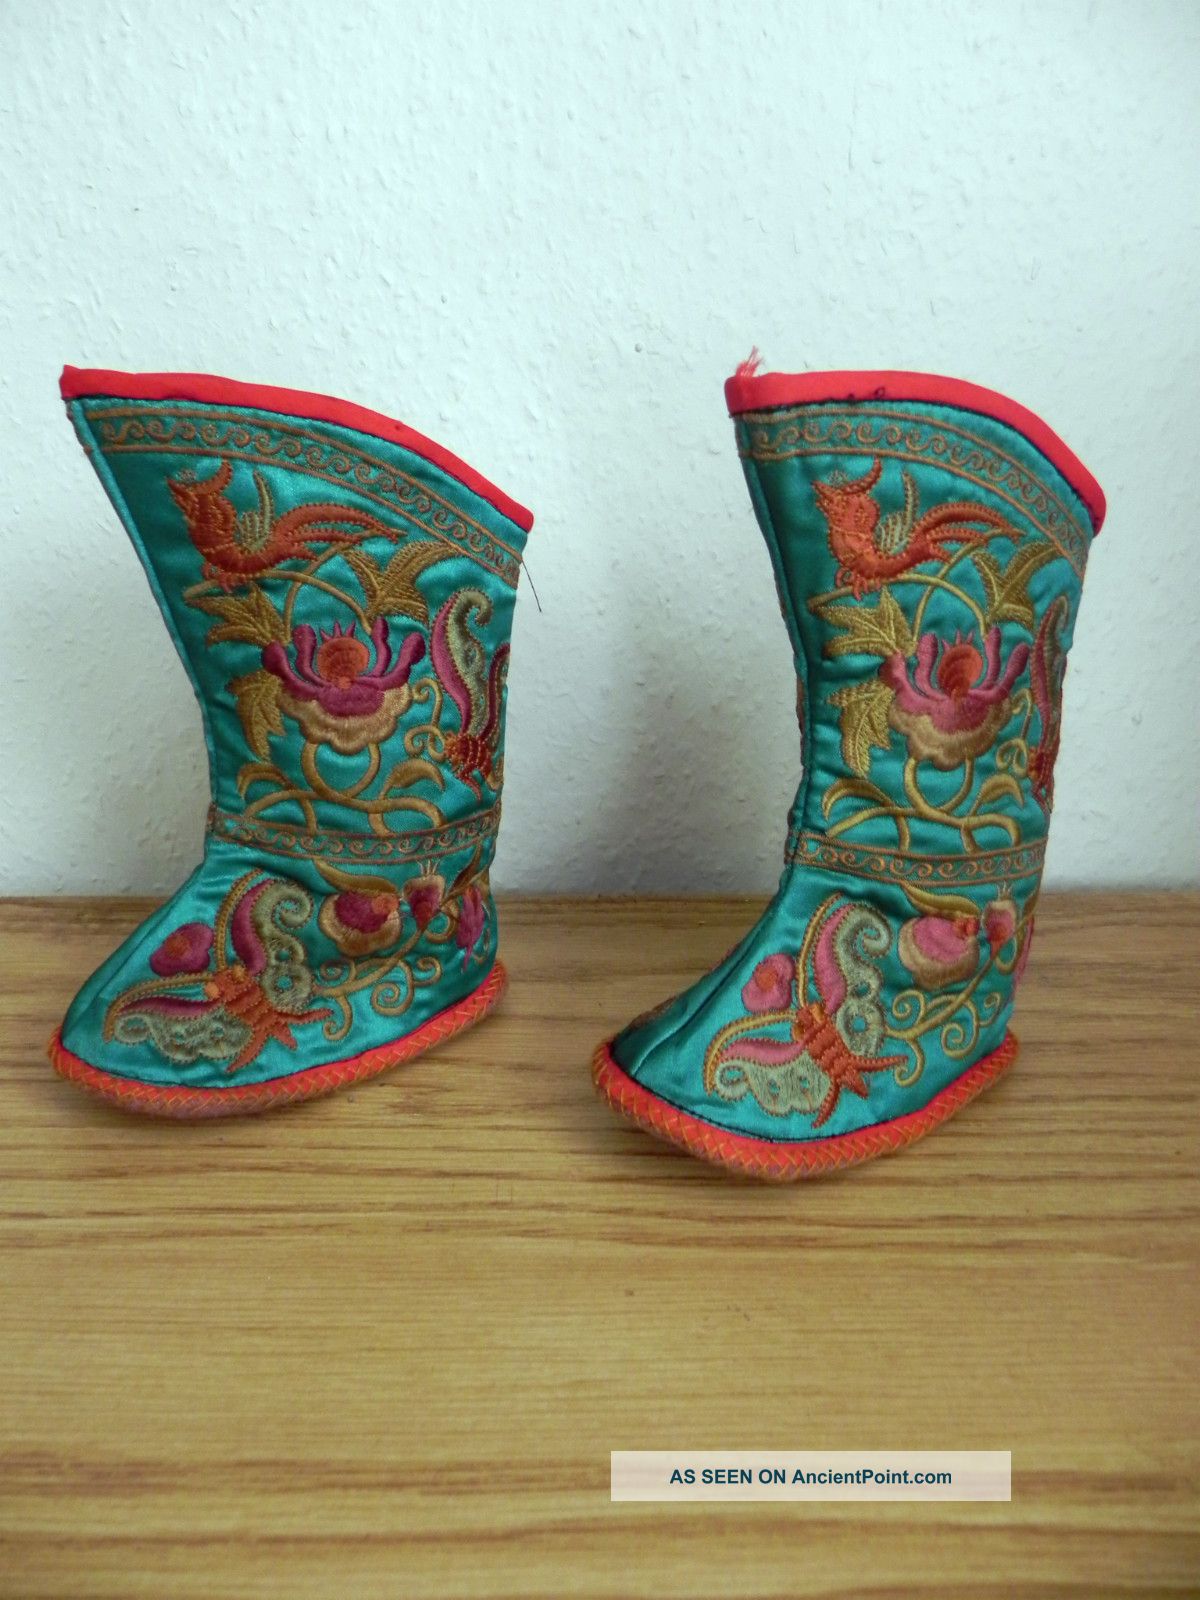 Fantastic Pair Of Chinese Silk Or Similar Fabric Childs Shoes / Booties - 20th C Textiles photo